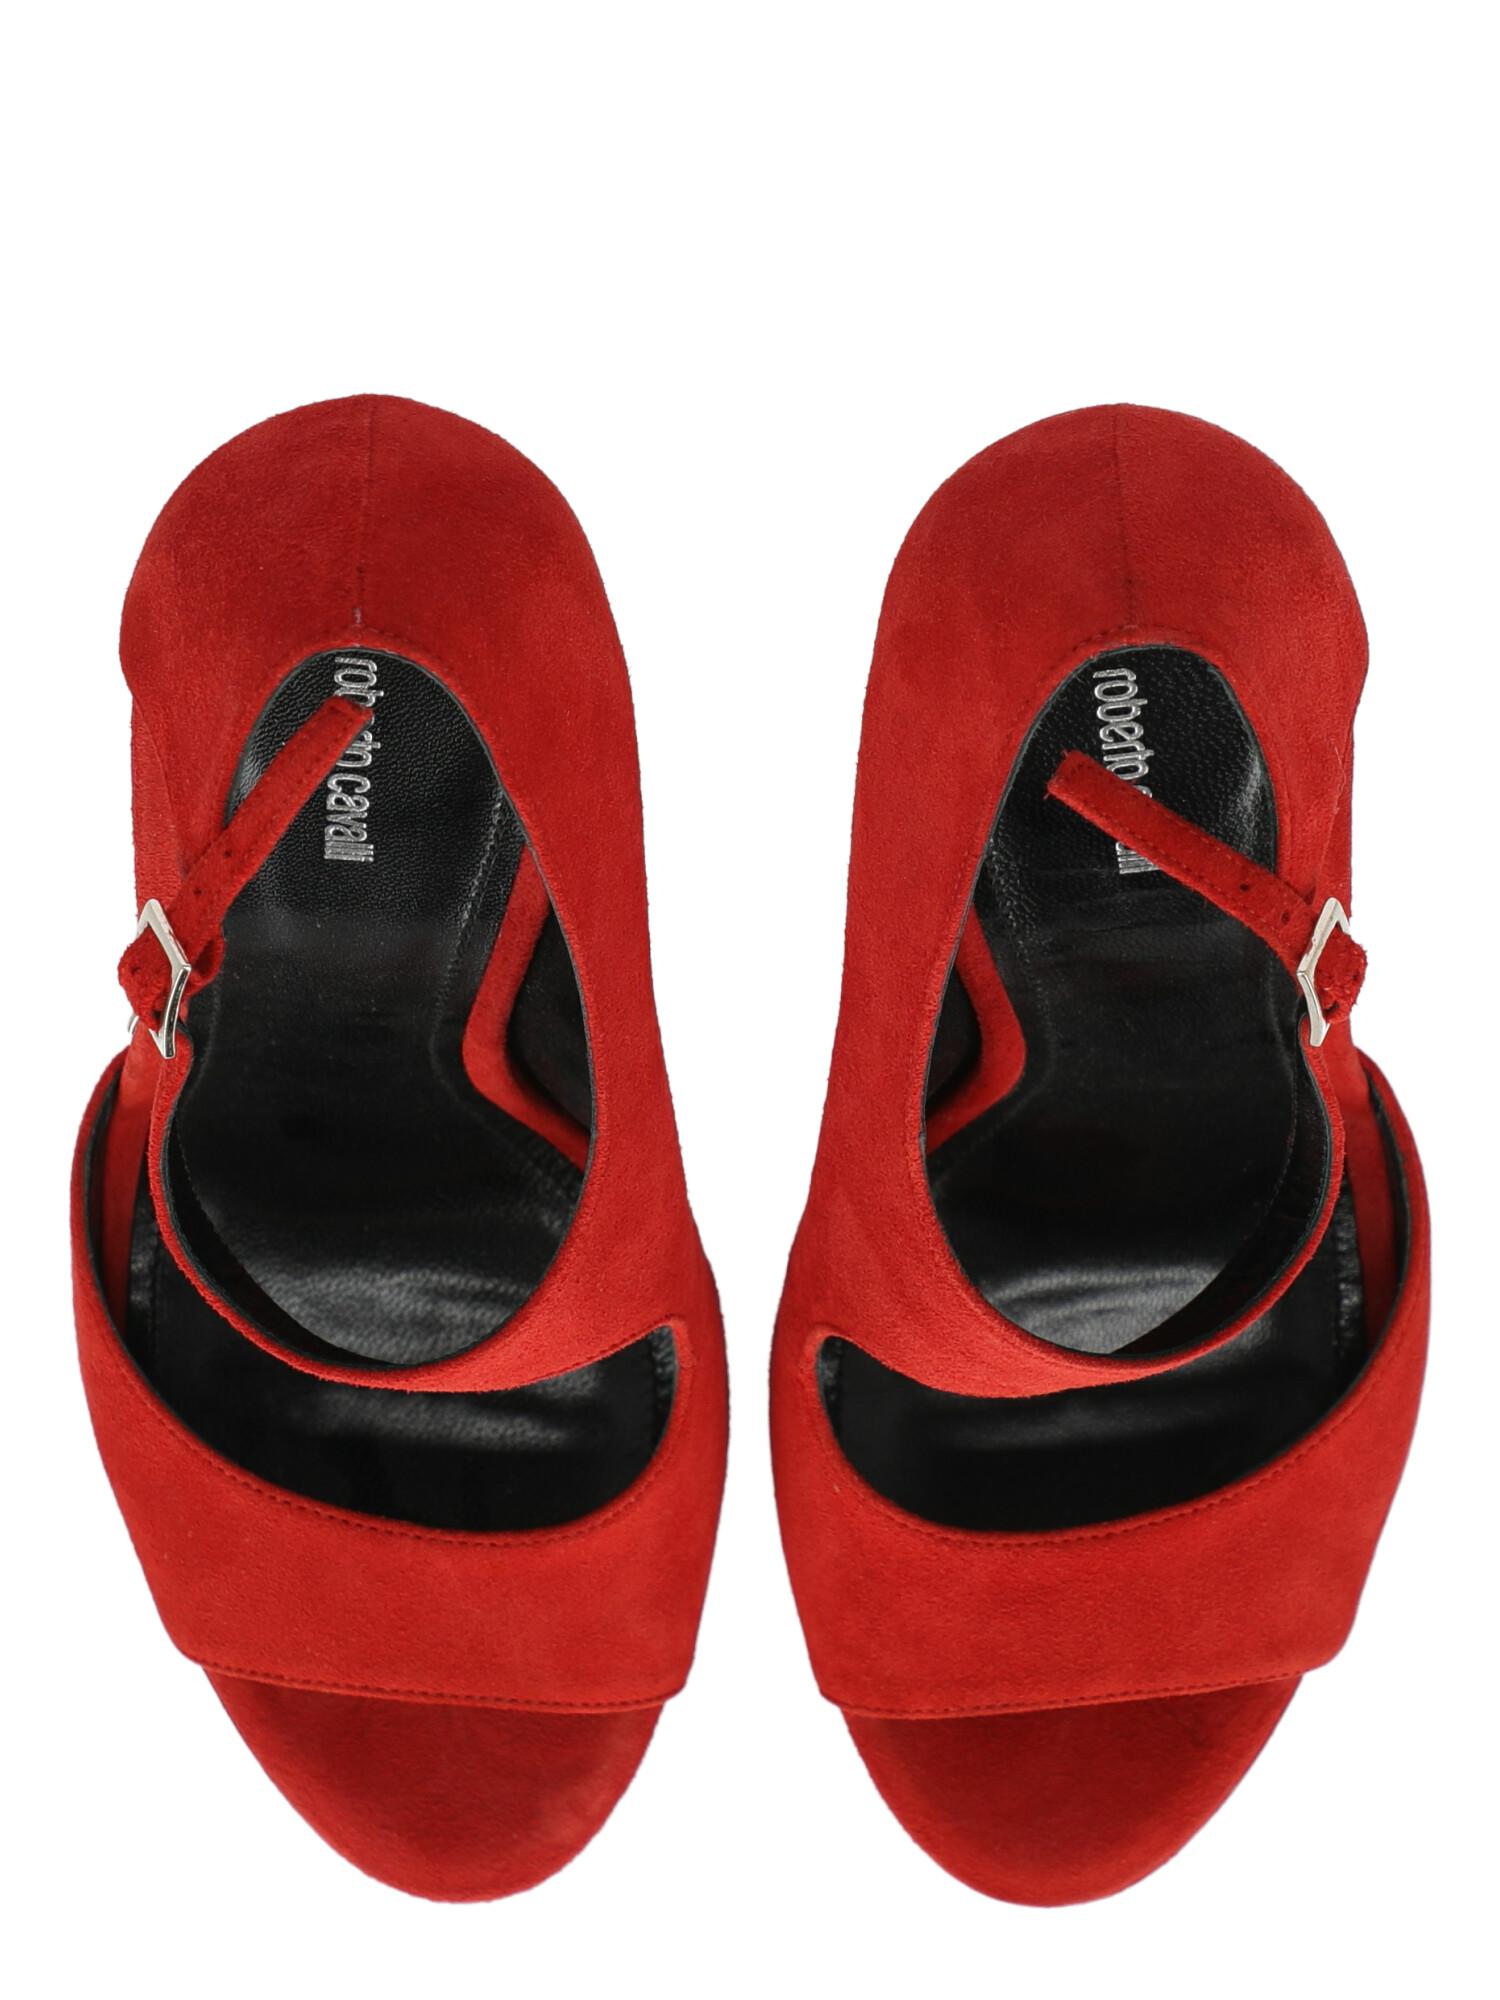 Gucci  Women   Sandals  Red Leather EU 37 For Sale 1